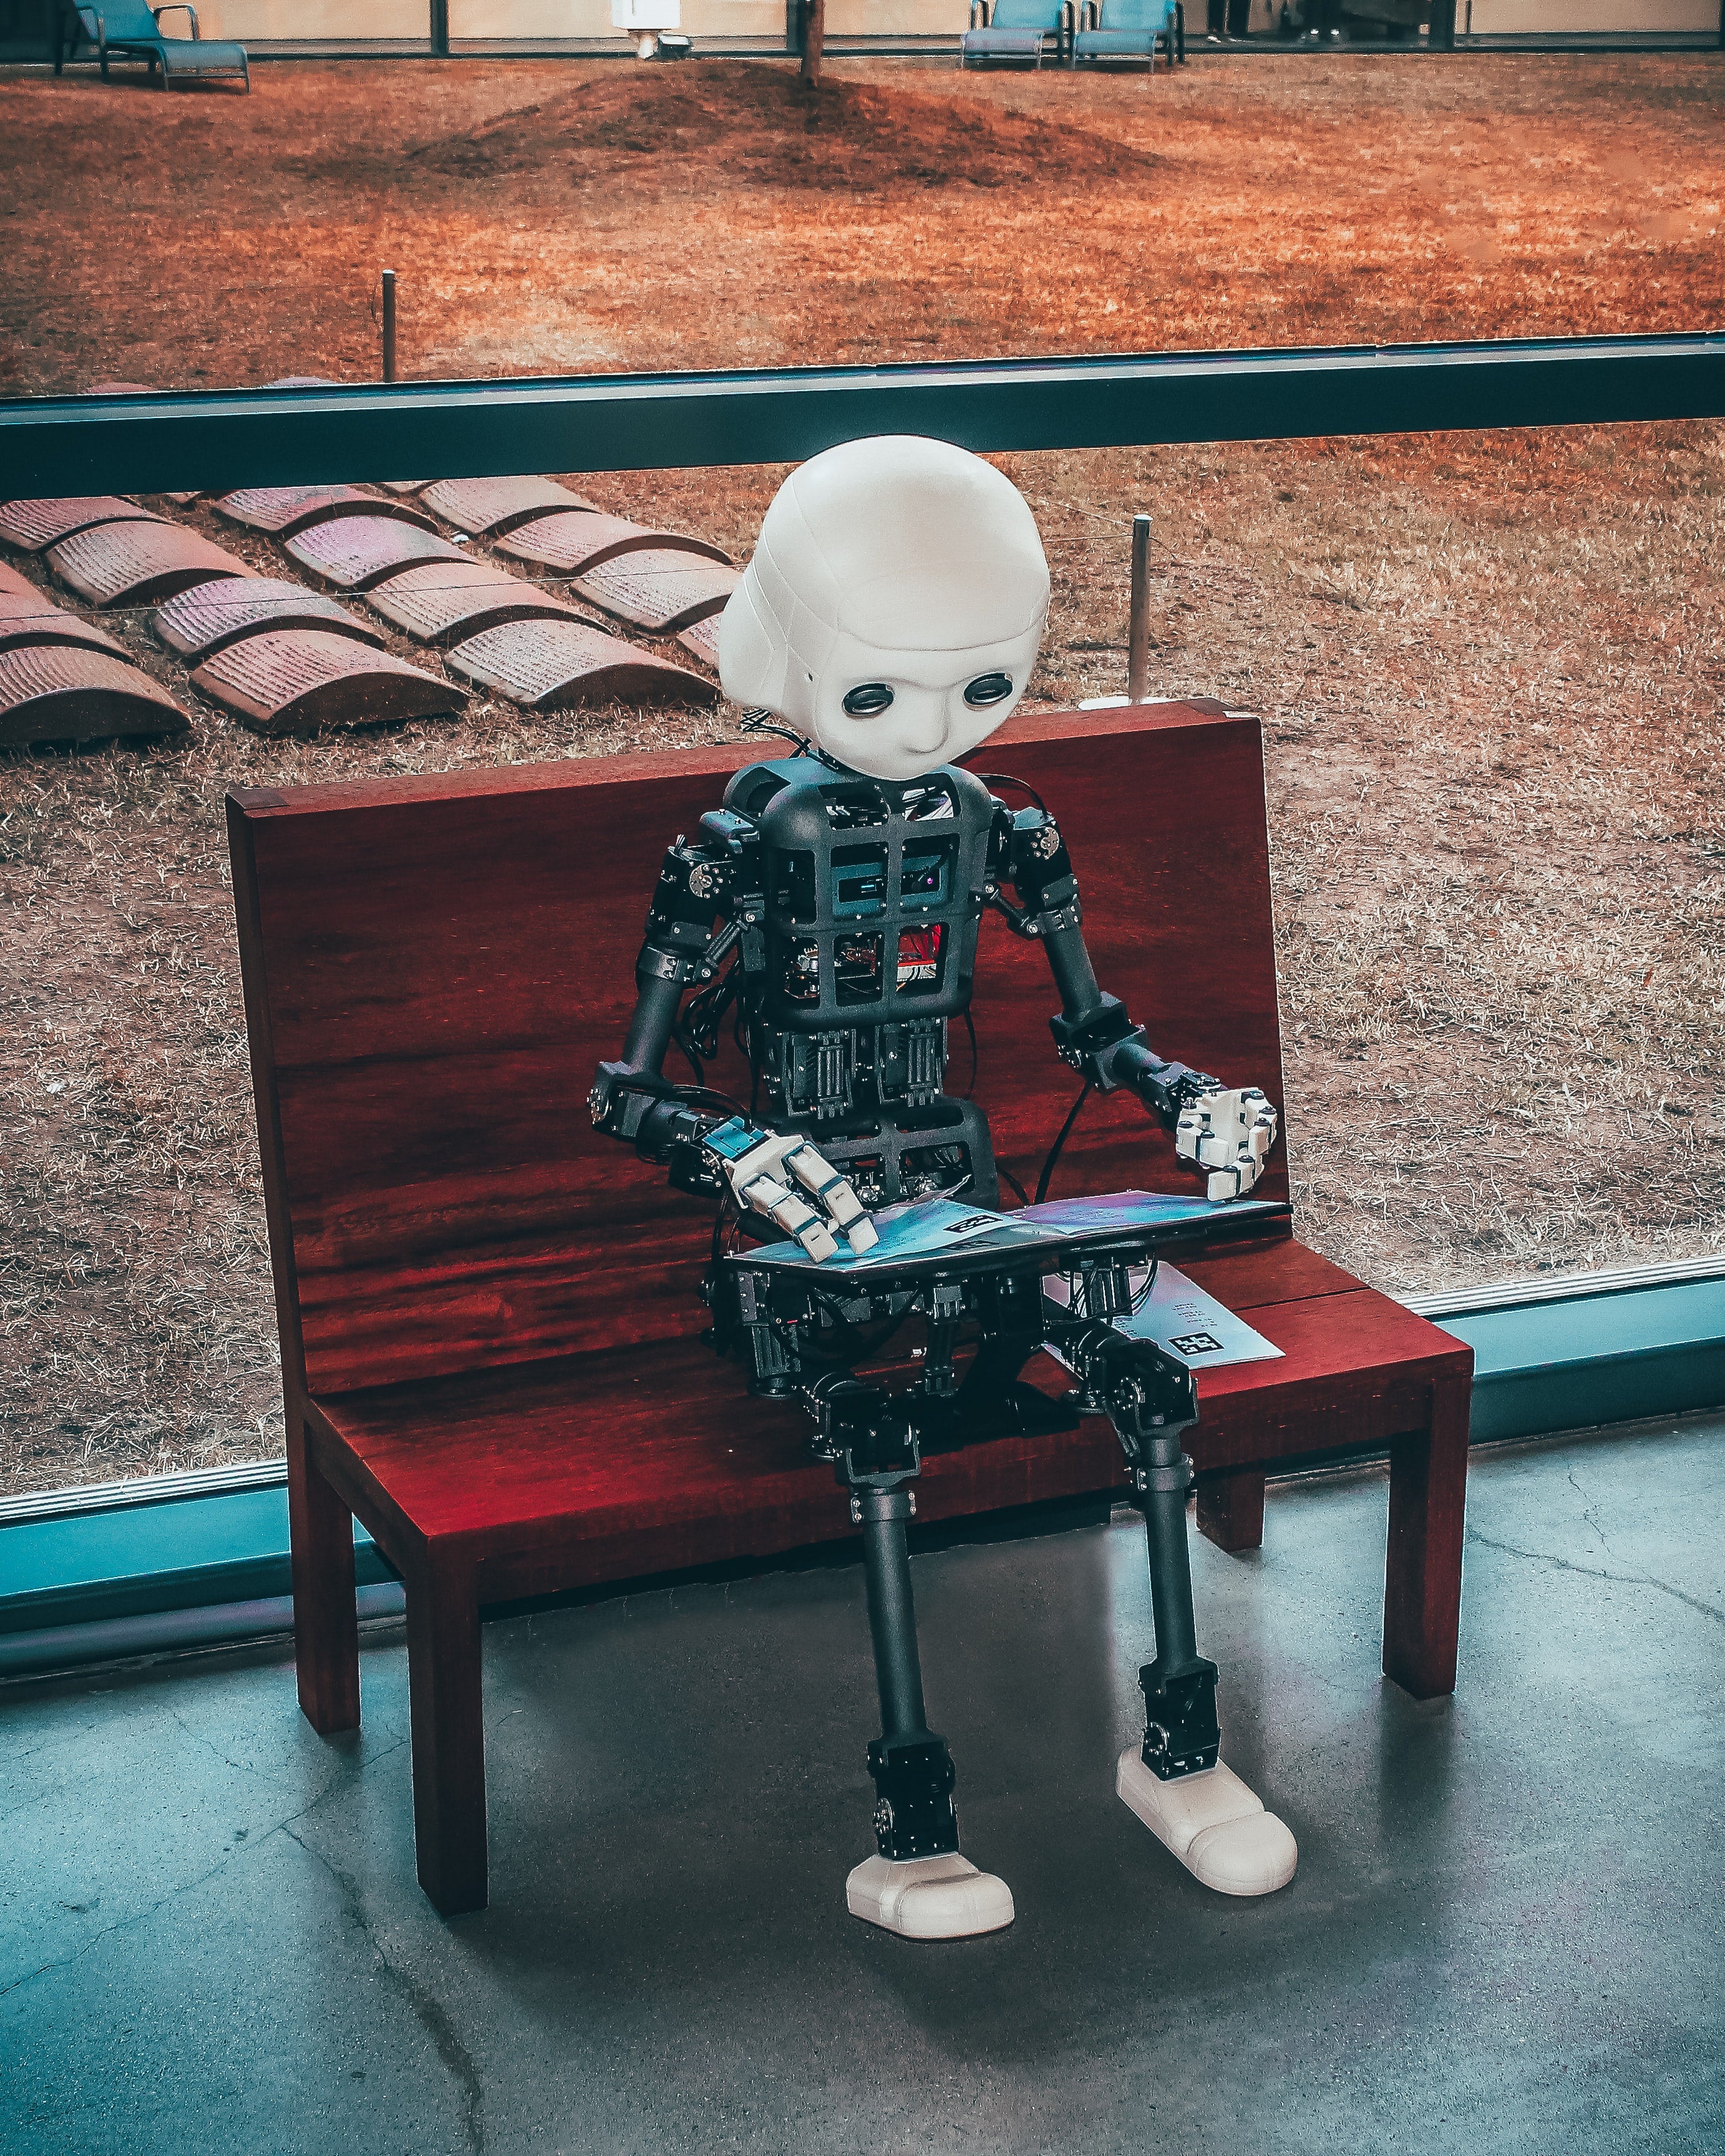 Robot appears to be reading on a bench